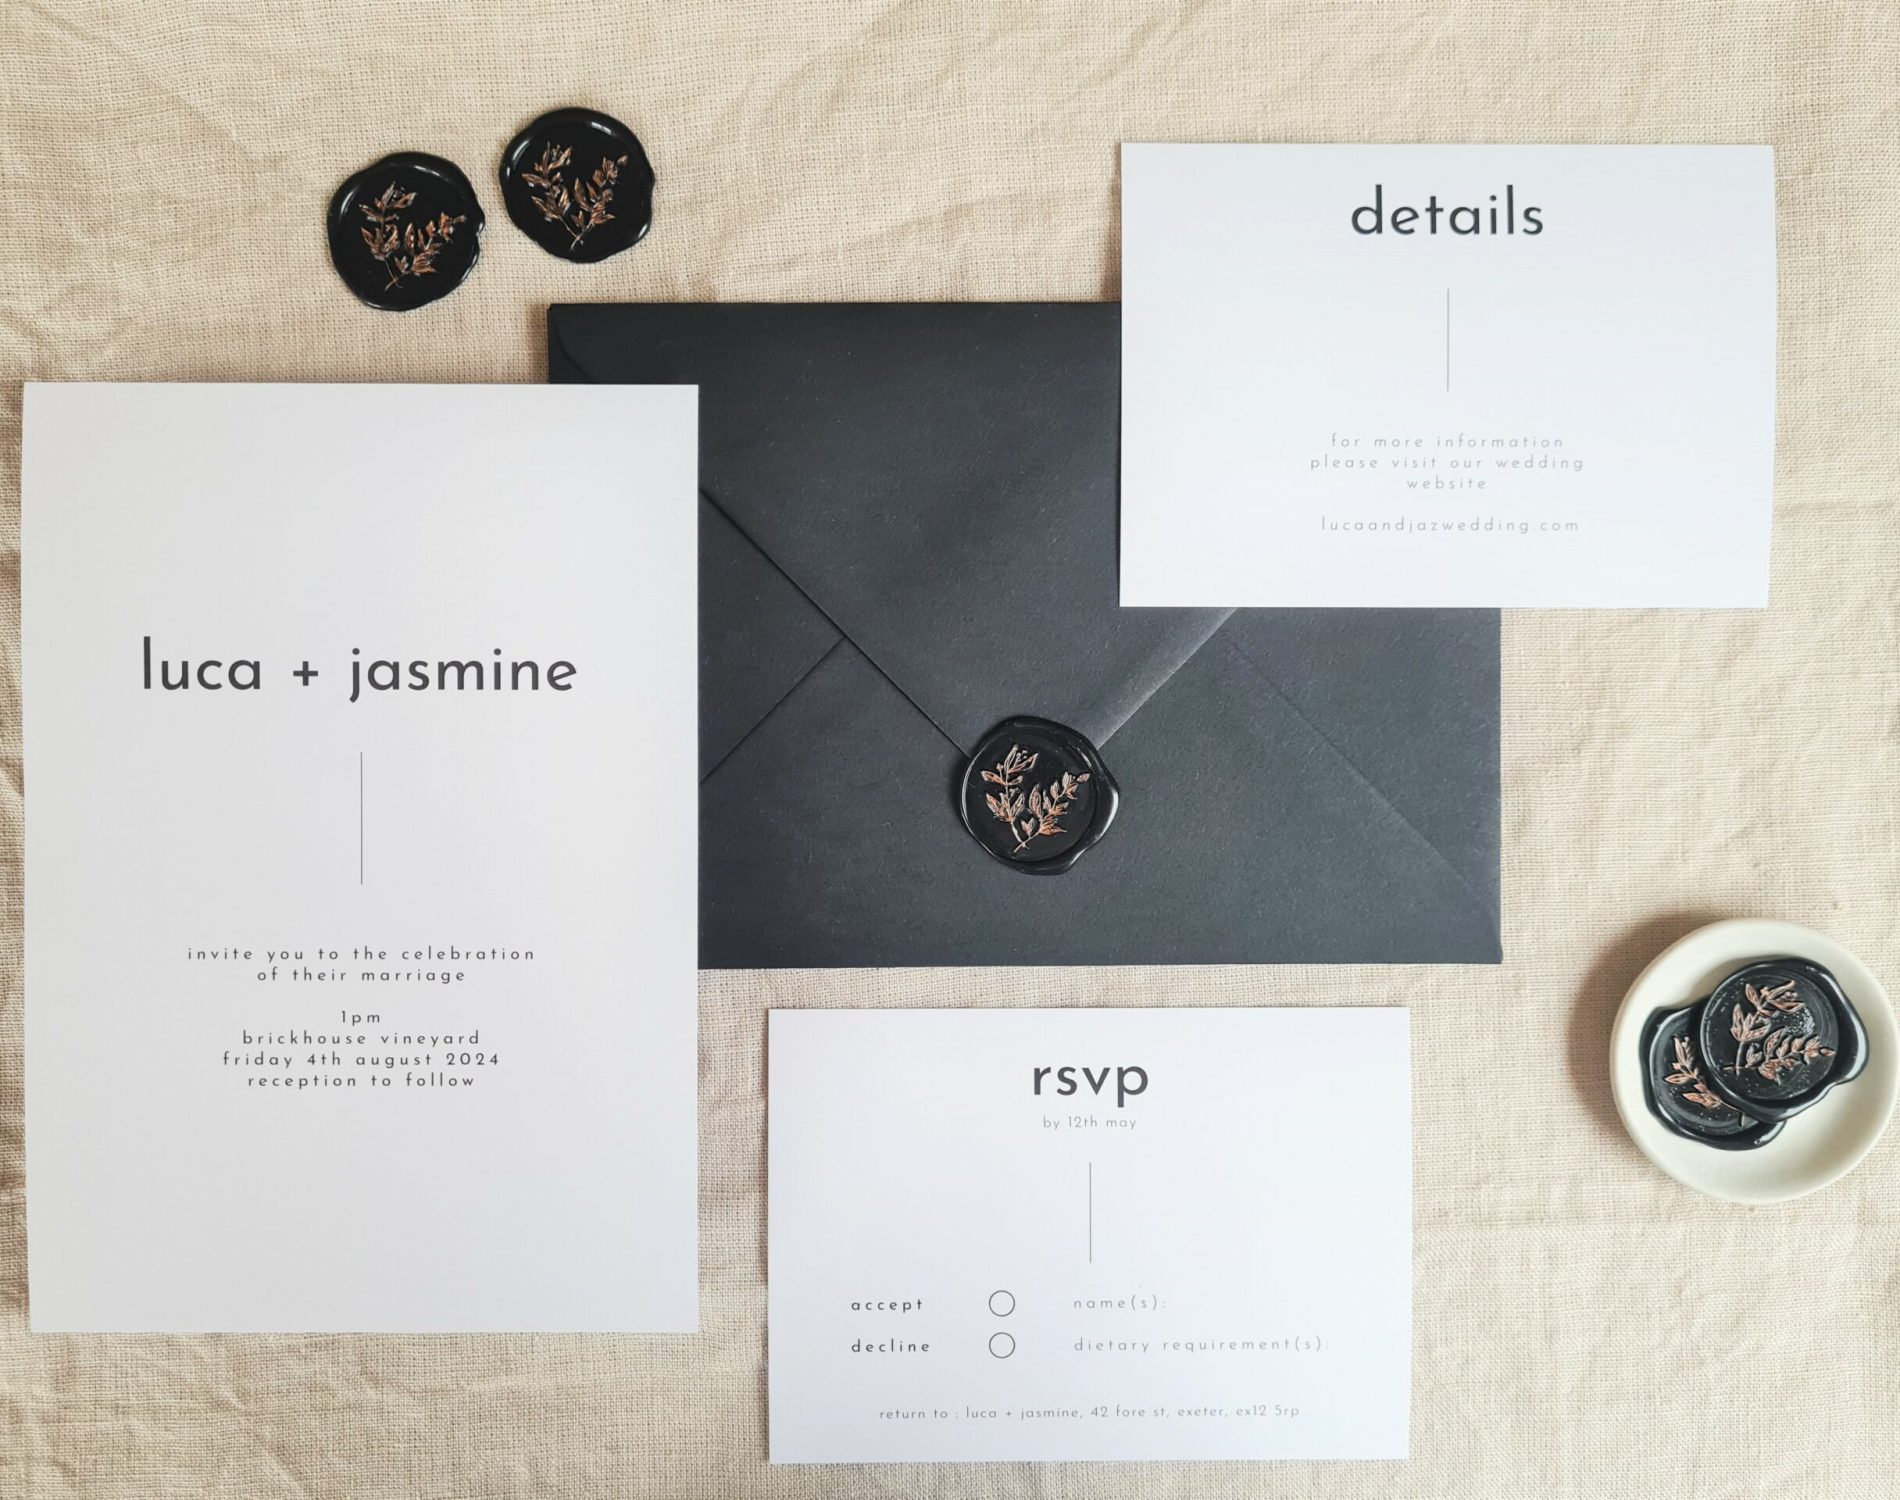 A black and white invitation suite flat lay. There is an RSVP card, invite and Details card. They are set against a beige linen background. Black wax seals, a mini white plate and a black envelope is arranged around it.